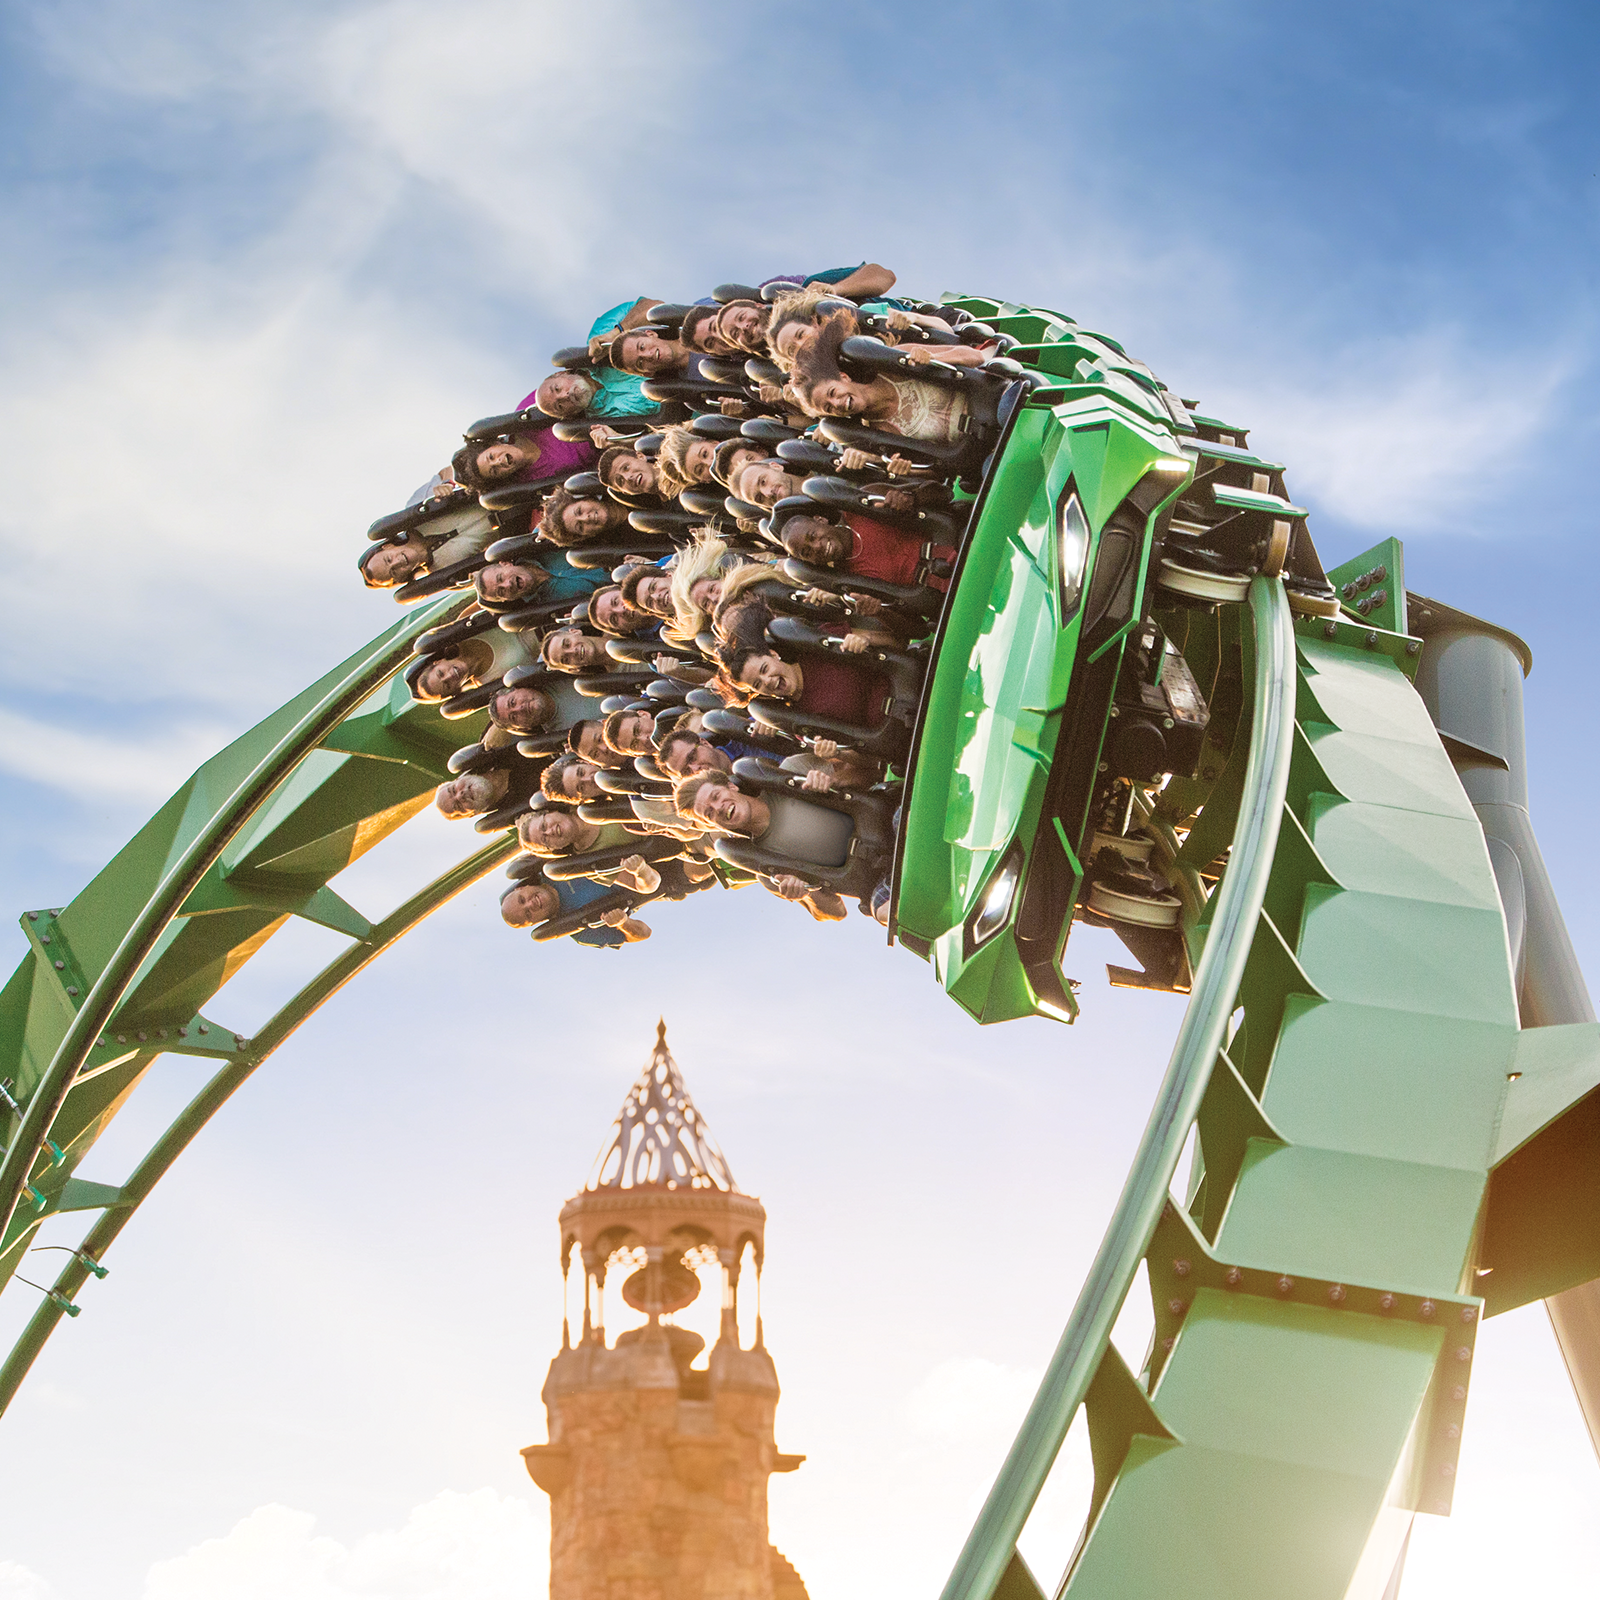 Universal Orlando: 2-Day Tickets Dated (USA/Canada Residents Only) in United States